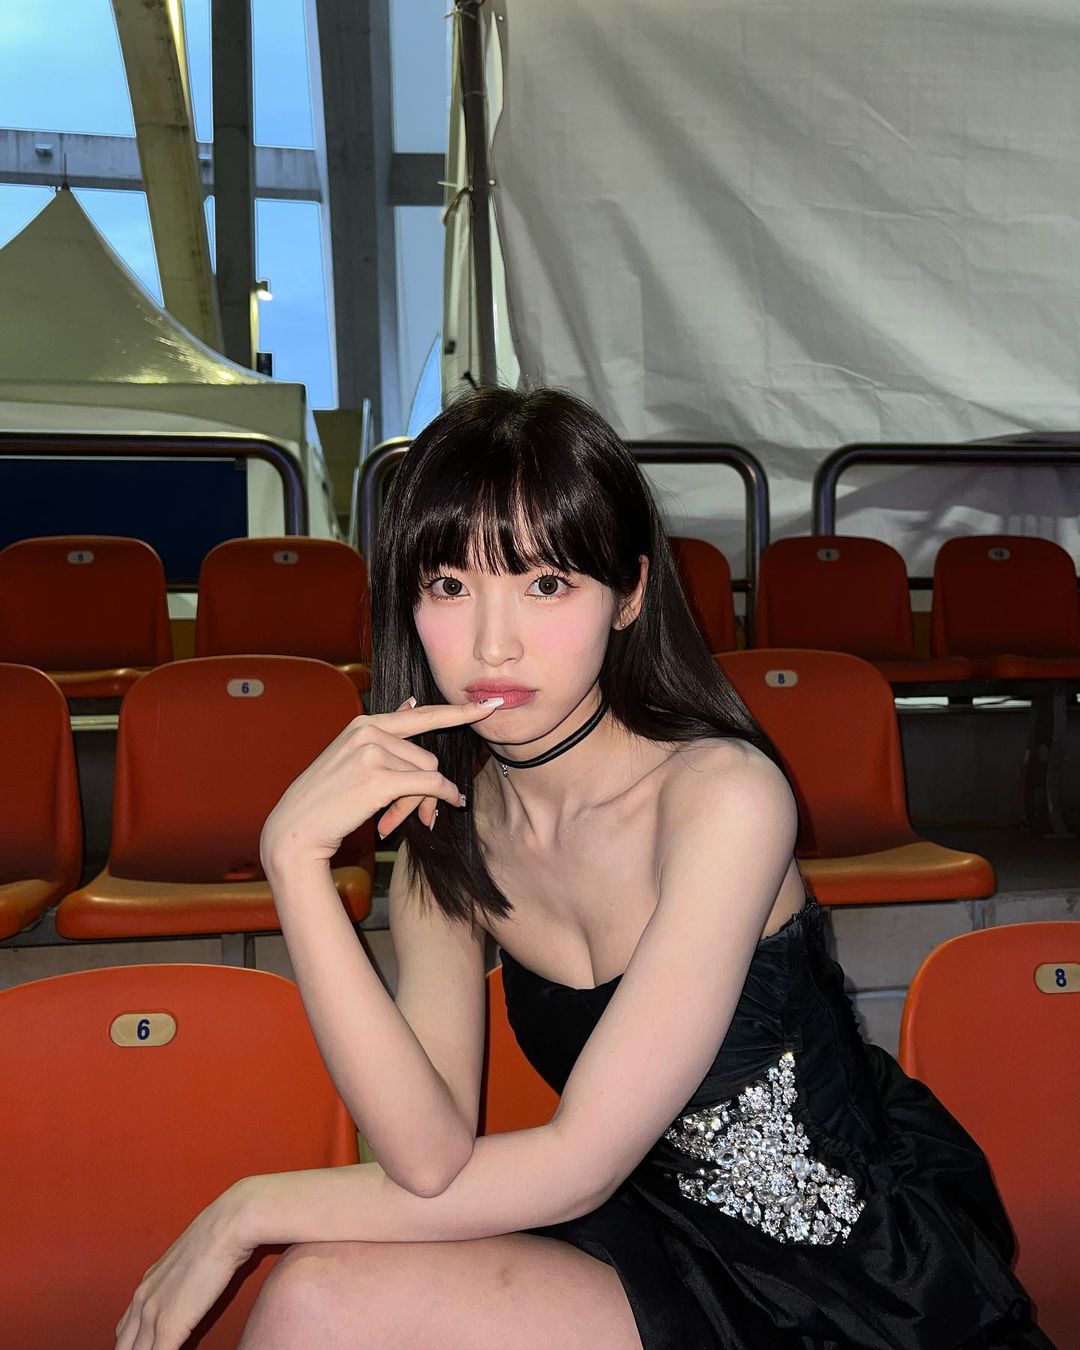 OH MY GIRL Arin, perfect visual captivating both innocence and sexy